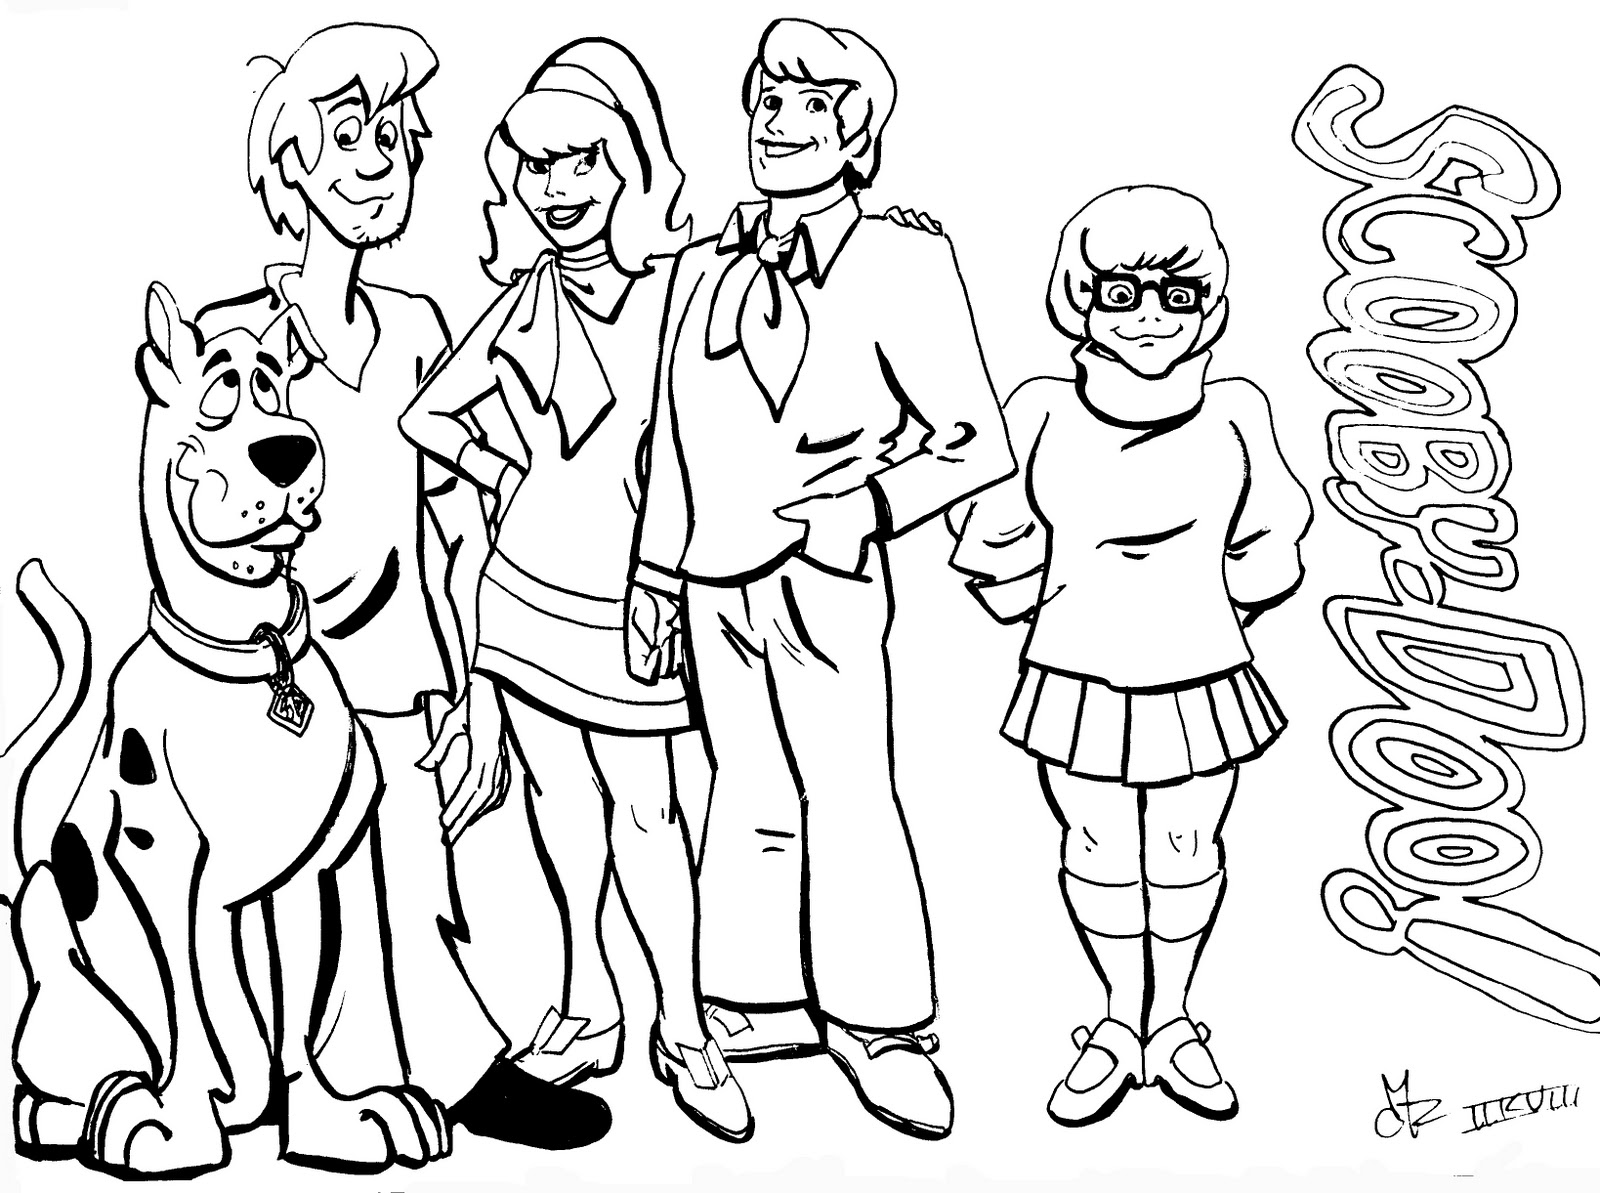 Download Scooby Doo Coloring Pages Pdf (15 Image) - Colorings.net